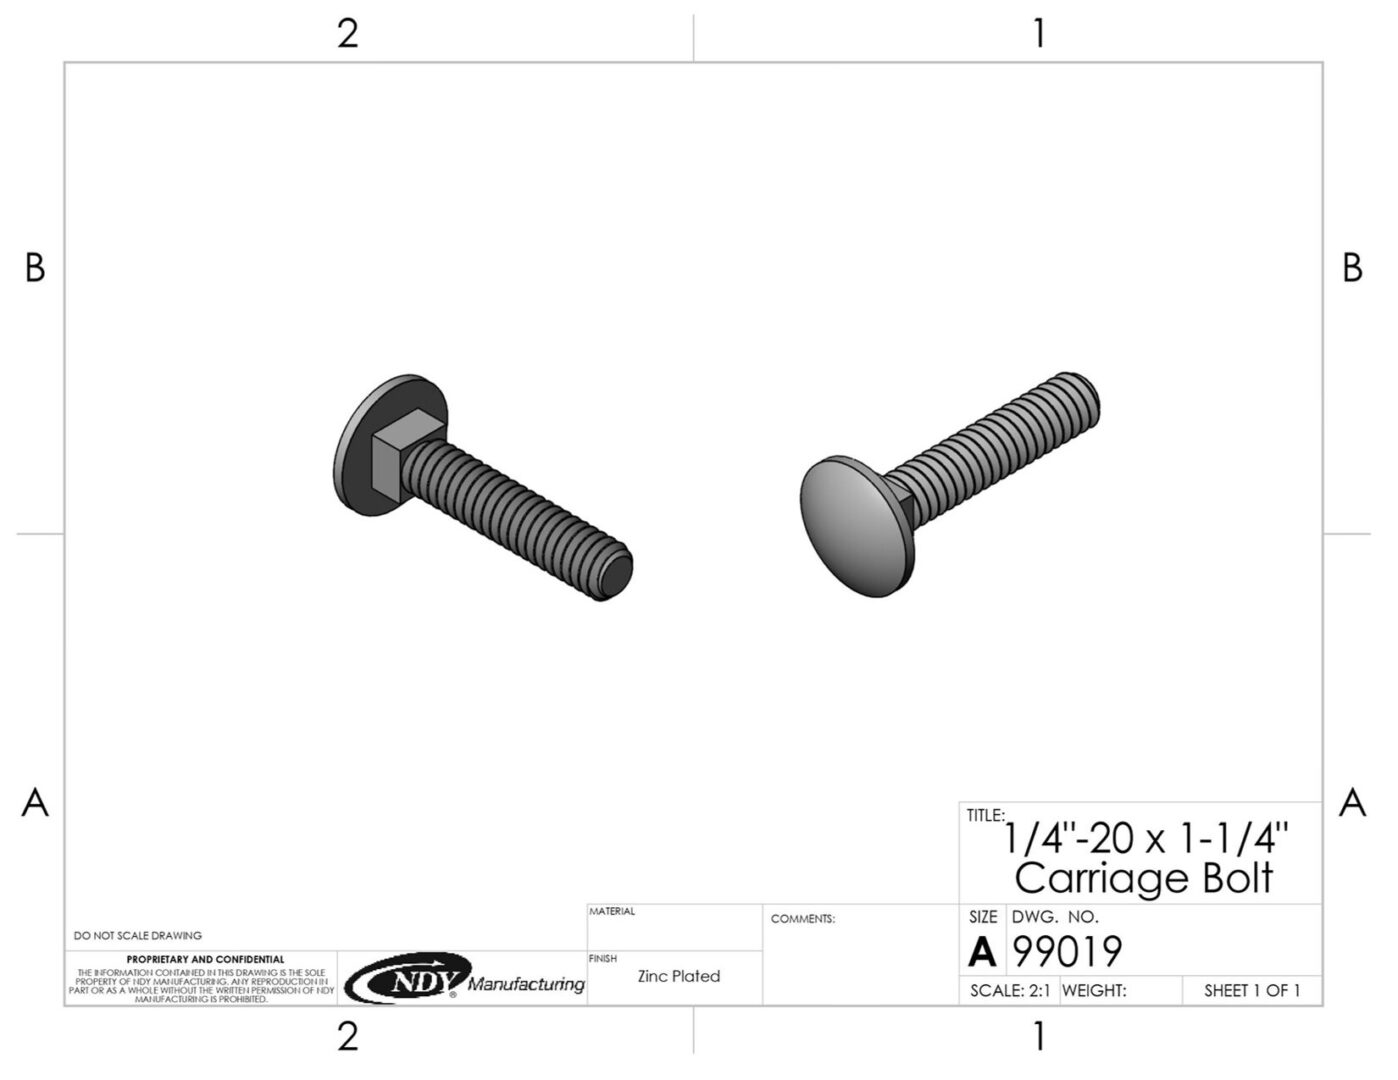 A drawing of a 1/4"-20 x 1-1/4" Grade 5 Carriage Bolt.